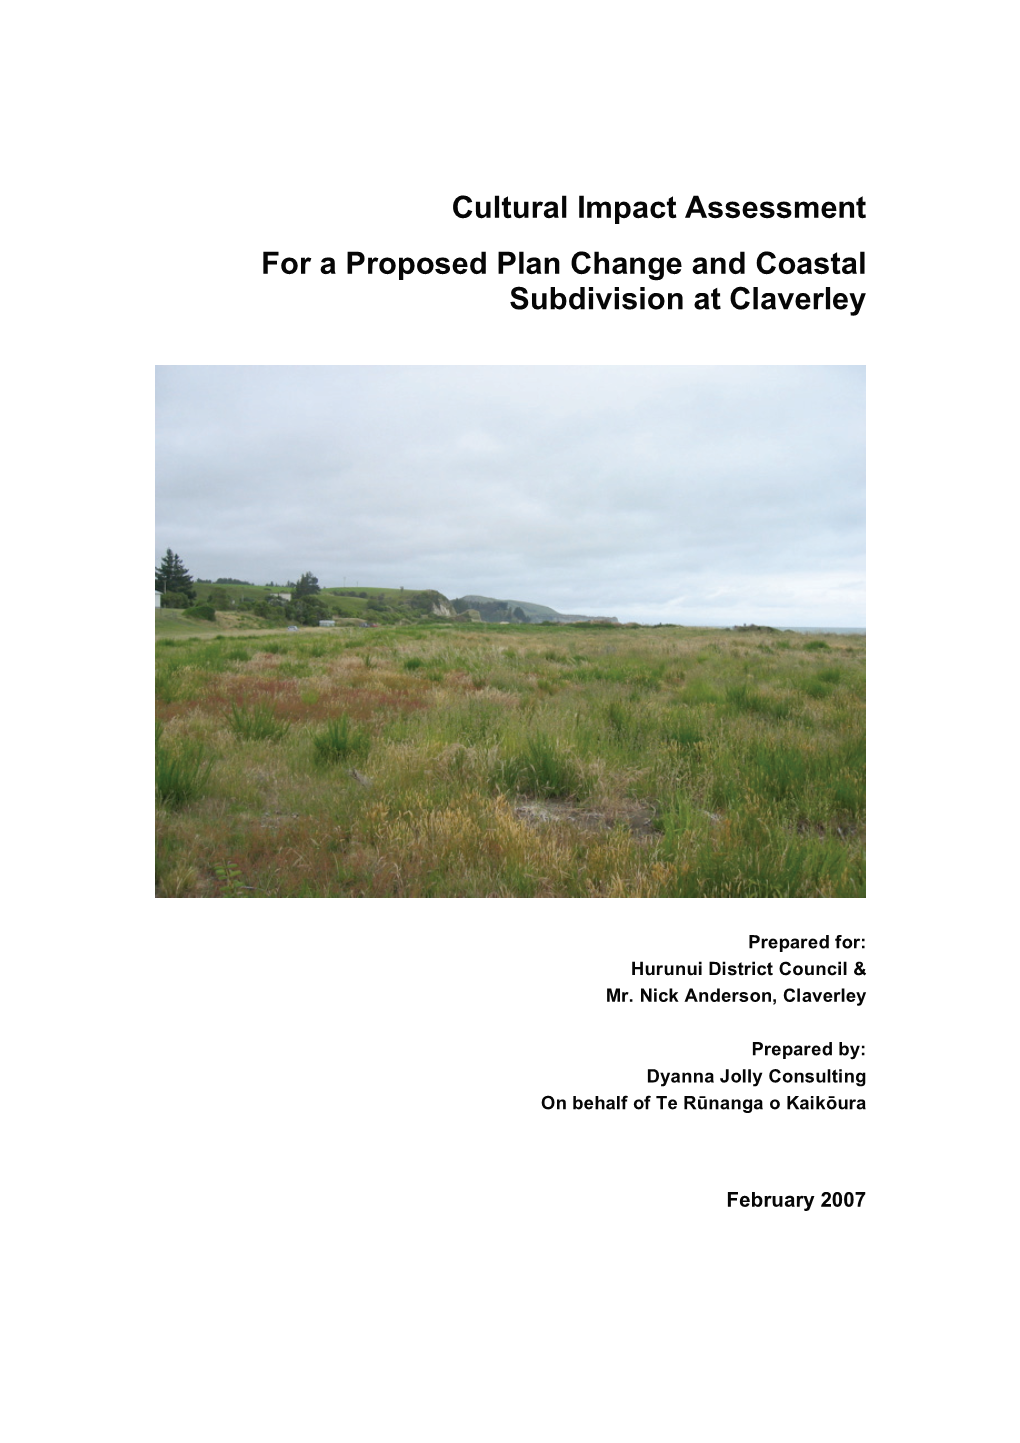 Cultural Impact Assessment for a Proposed Plan Change and Coastal Subdivision at Claverley